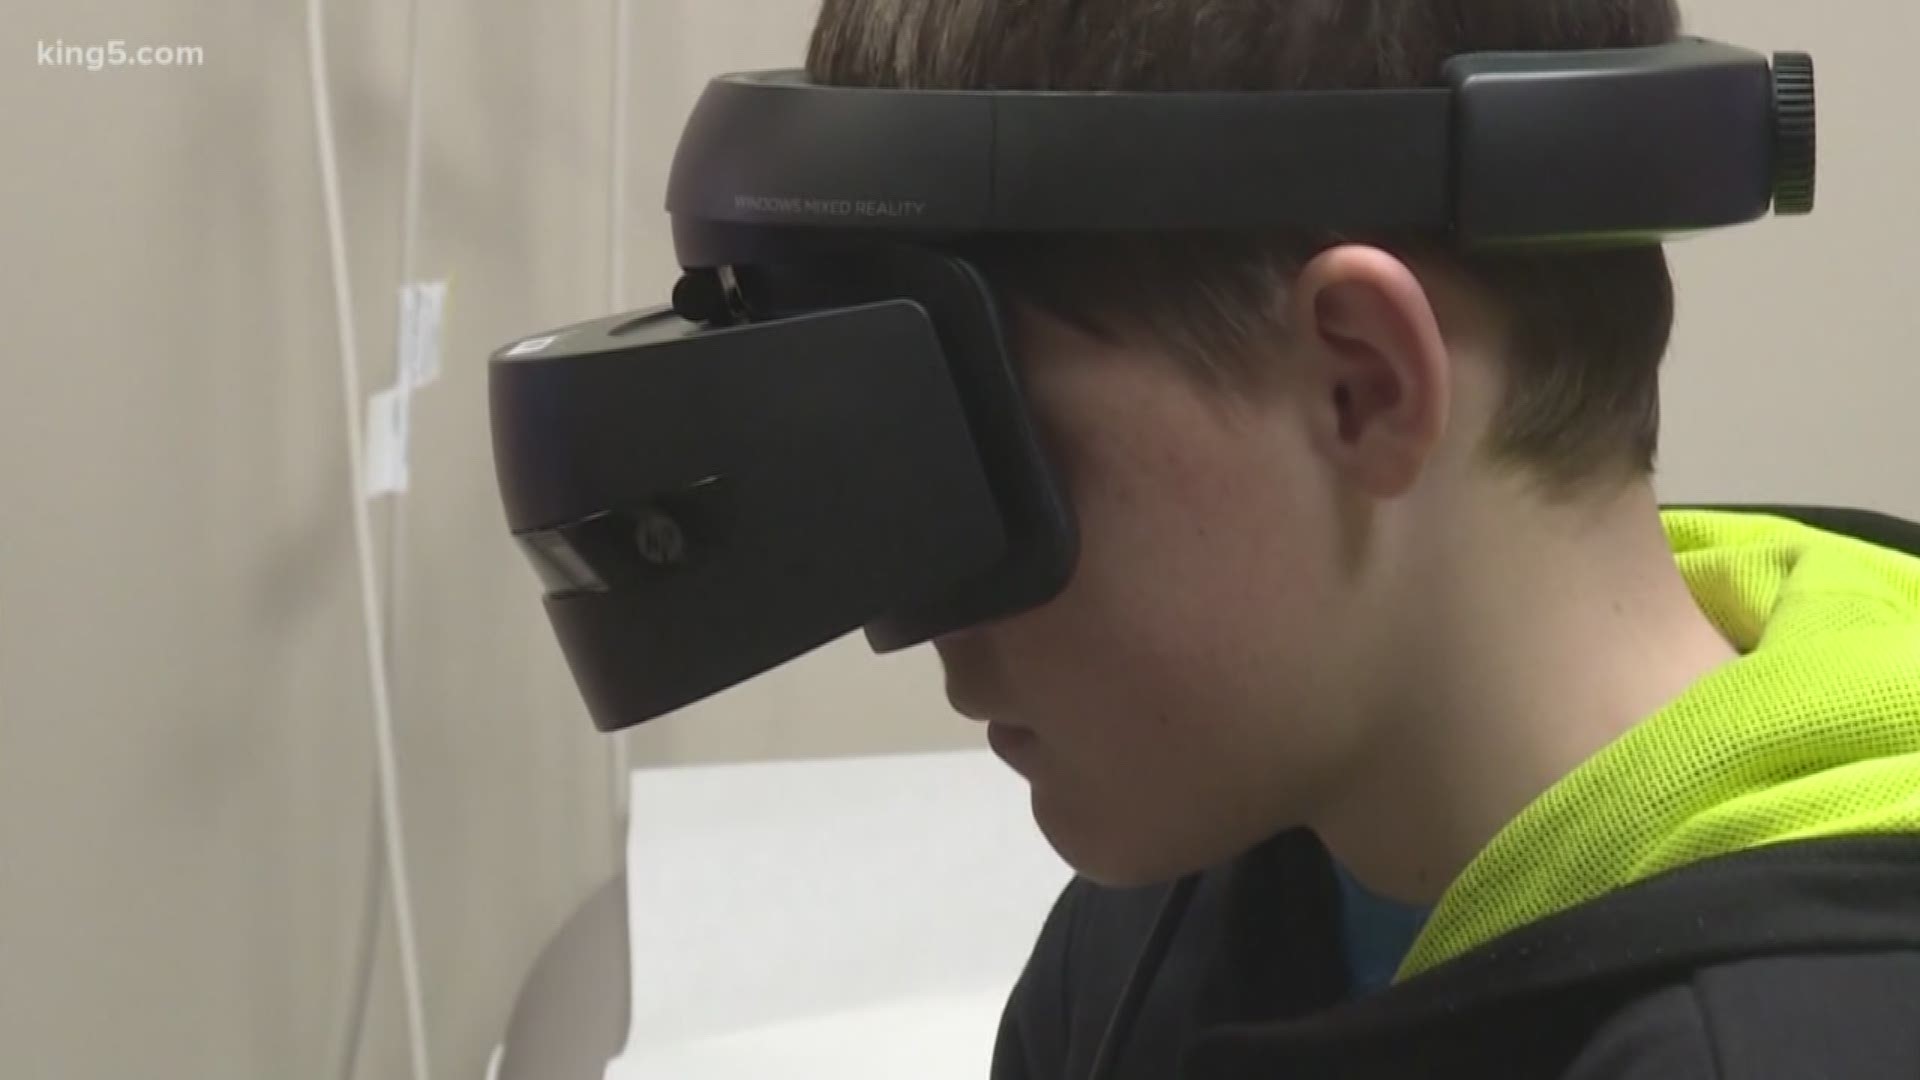 Cancer treatment can be scary for anyone, especially a child. So, specialists are using virtual reality to ease anxiety. KING 5's Amity Addrisi has the details.